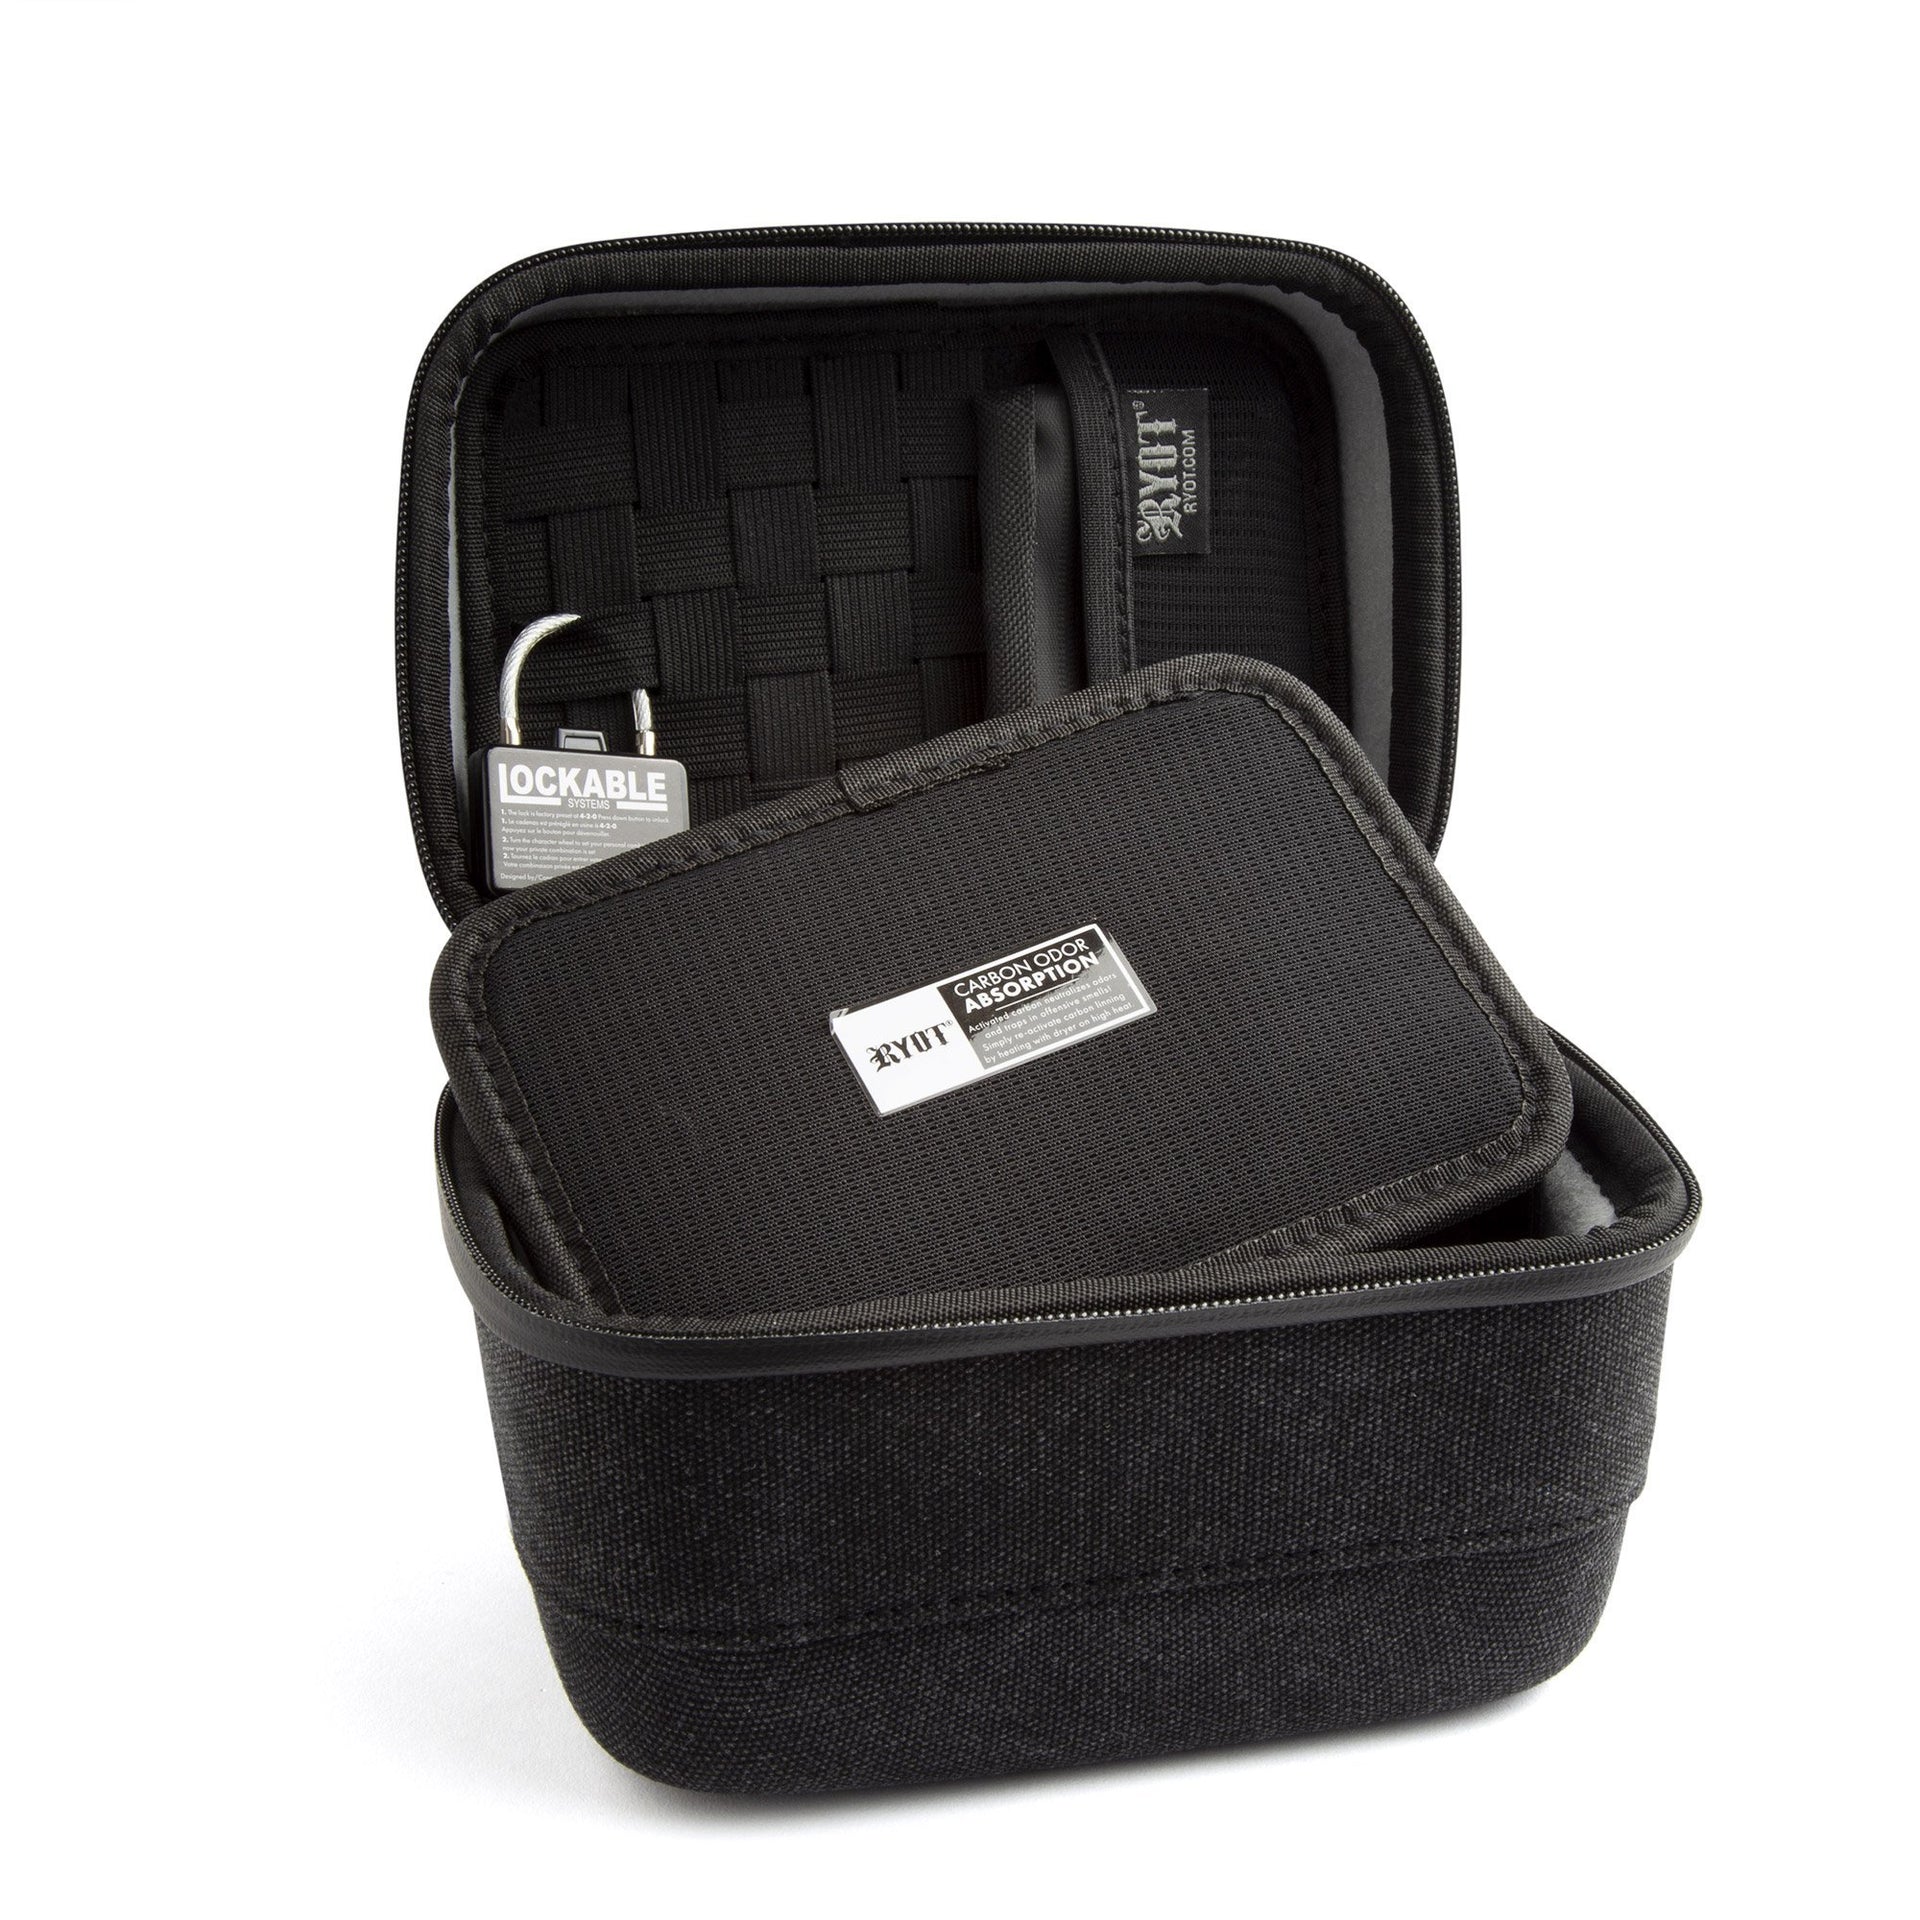 RYOT SmellSafe Carbon Series Safe Case w/Combo Lock - Small - 420 Science - The most trusted online smoke shop.